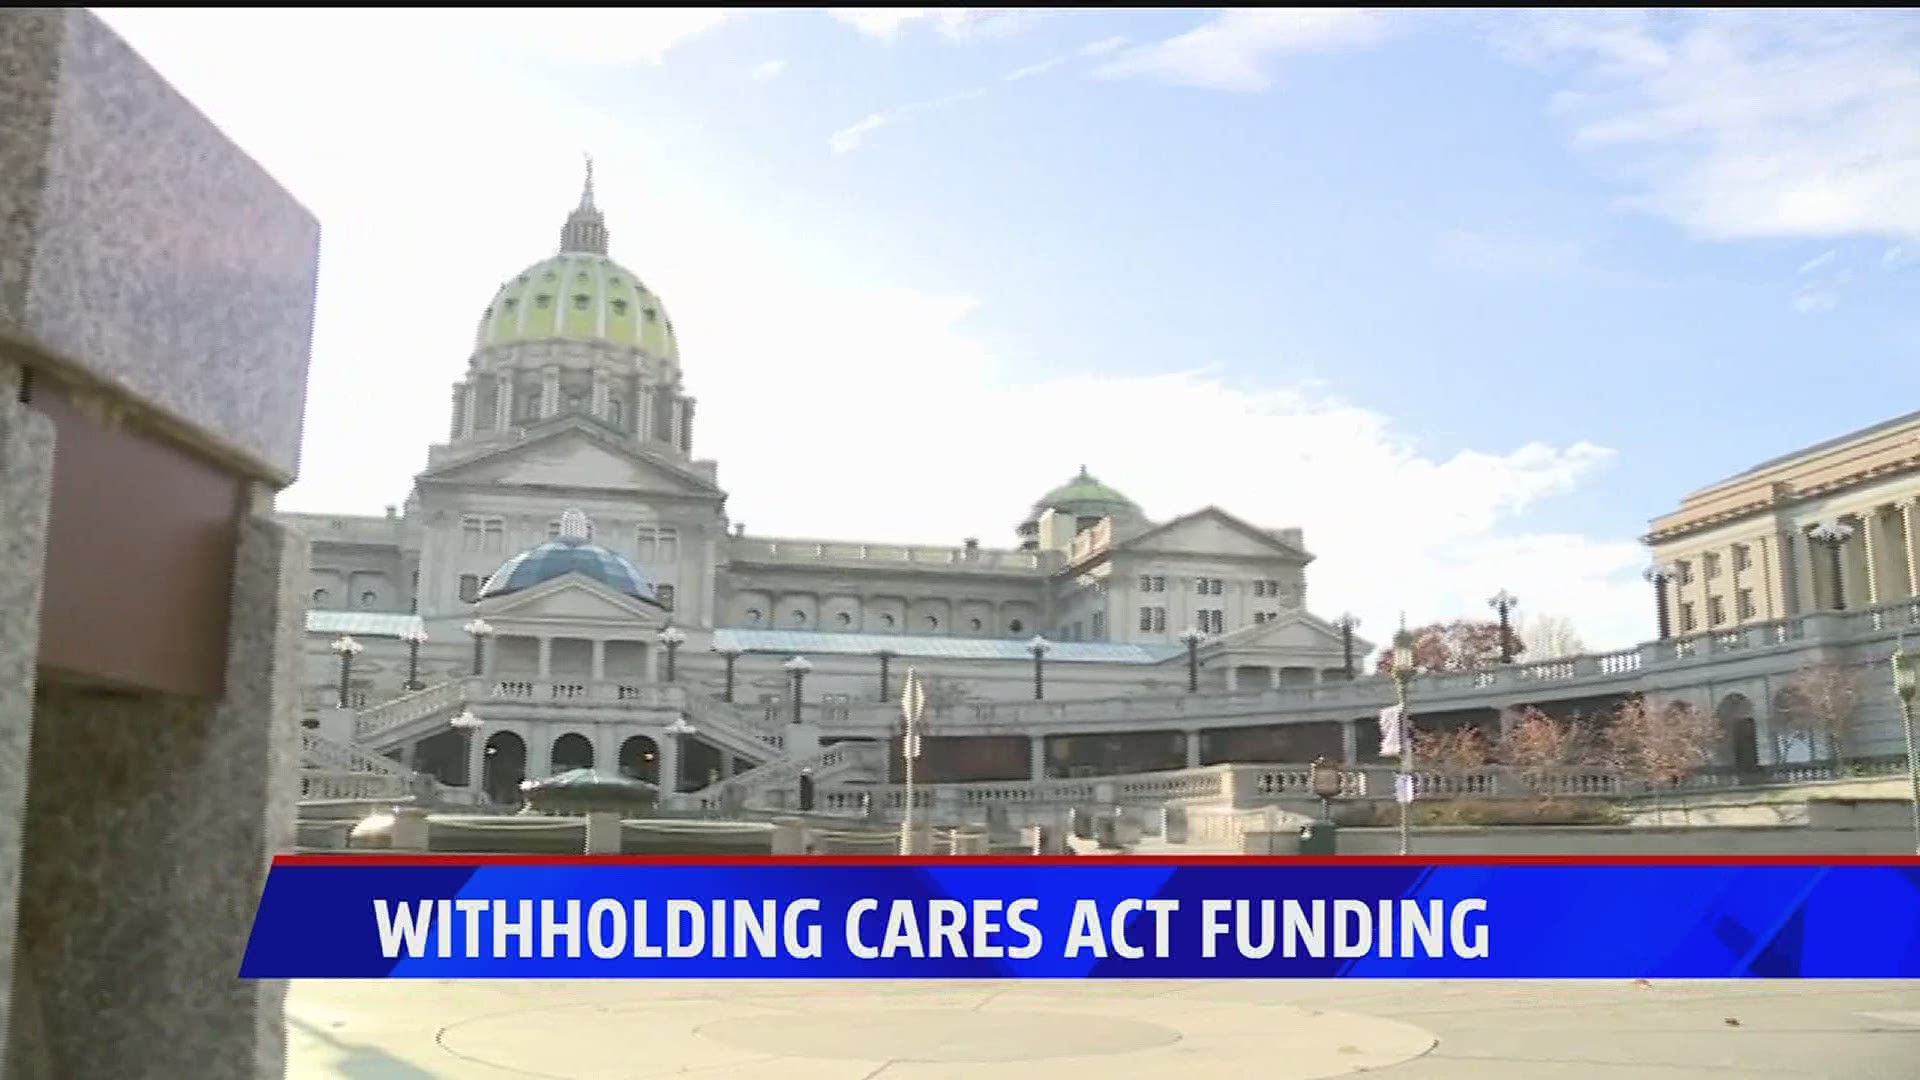 However, the withholding of CARES Act funding from Lebanon County has drawn criticism